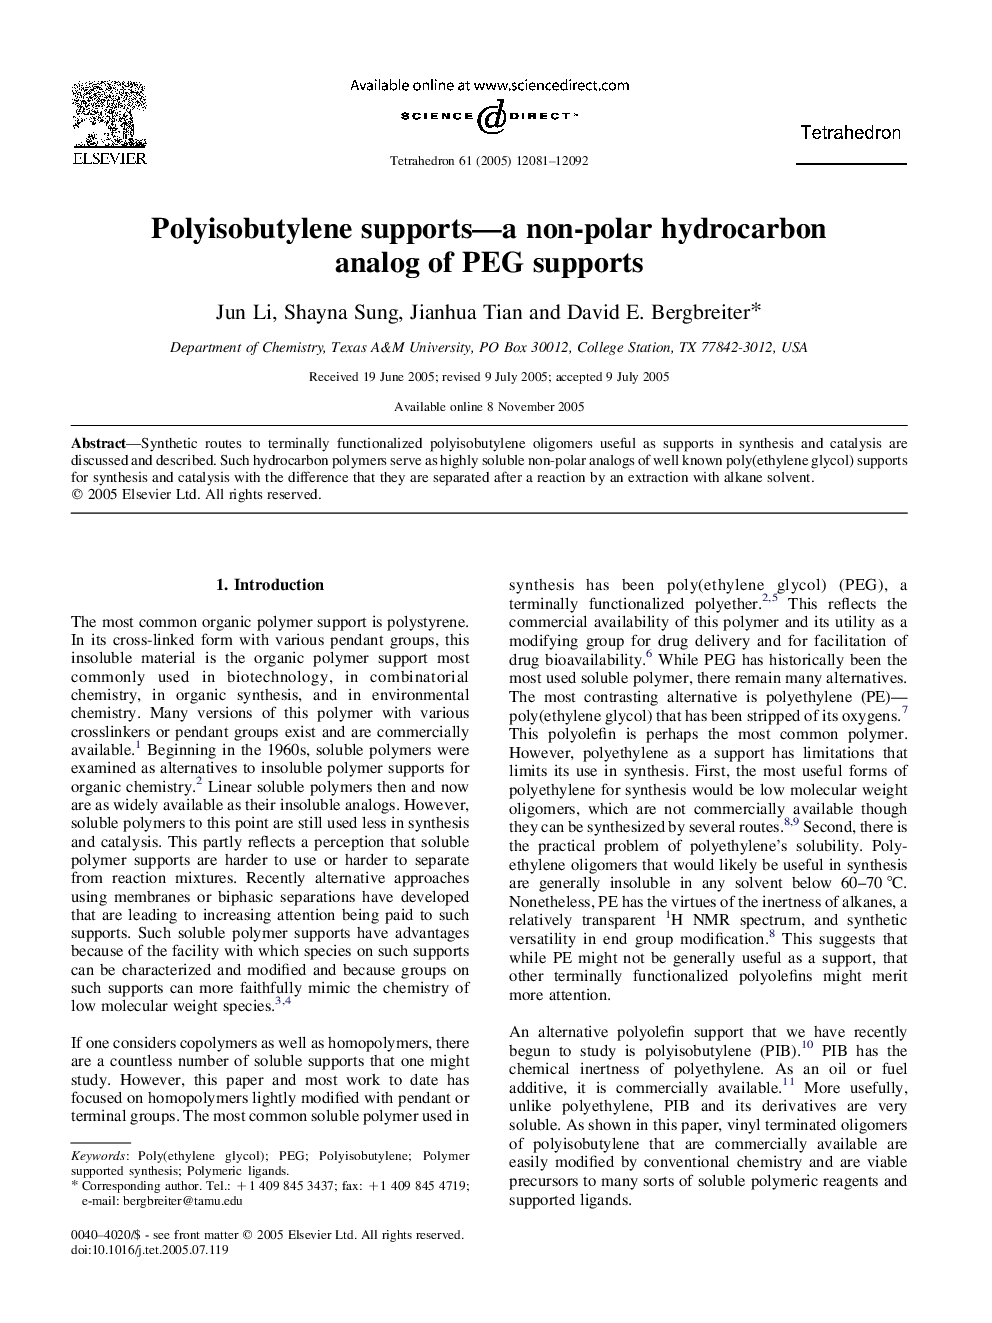 Polyisobutylene supports-a non-polar hydrocarbon analog of PEG supports